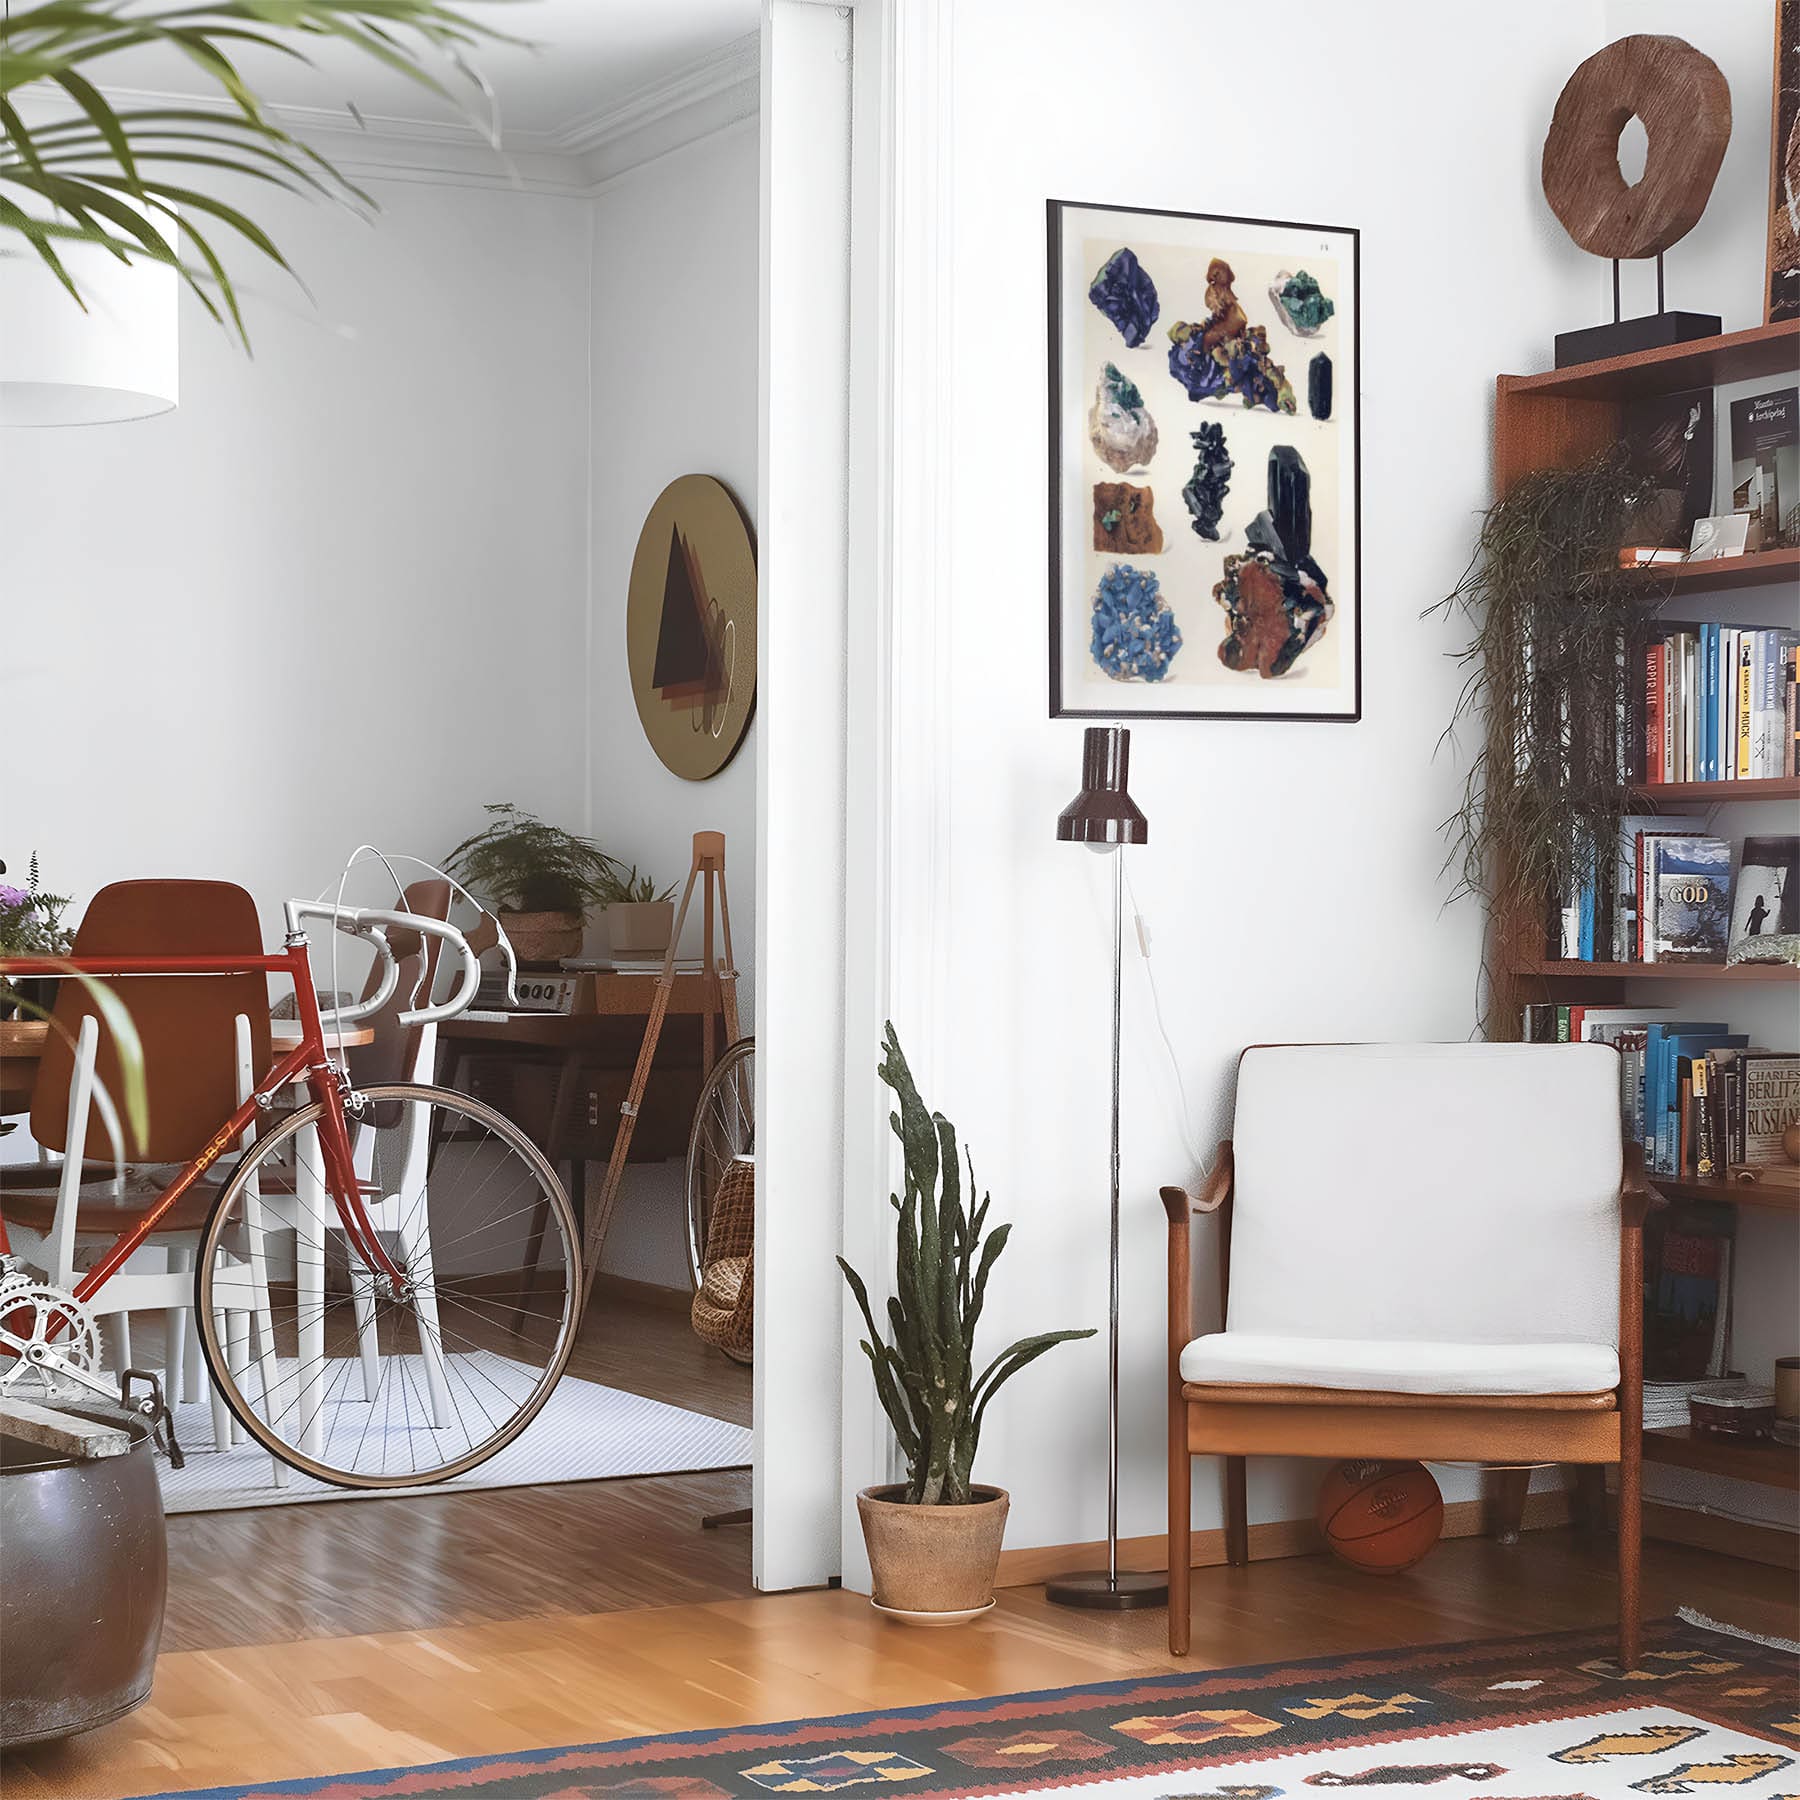 Eclectic living room with a road bike, bookshelf and house plants that features framed artwork of a Purple, Blue and Multi-Color Gems above a chair and lamp